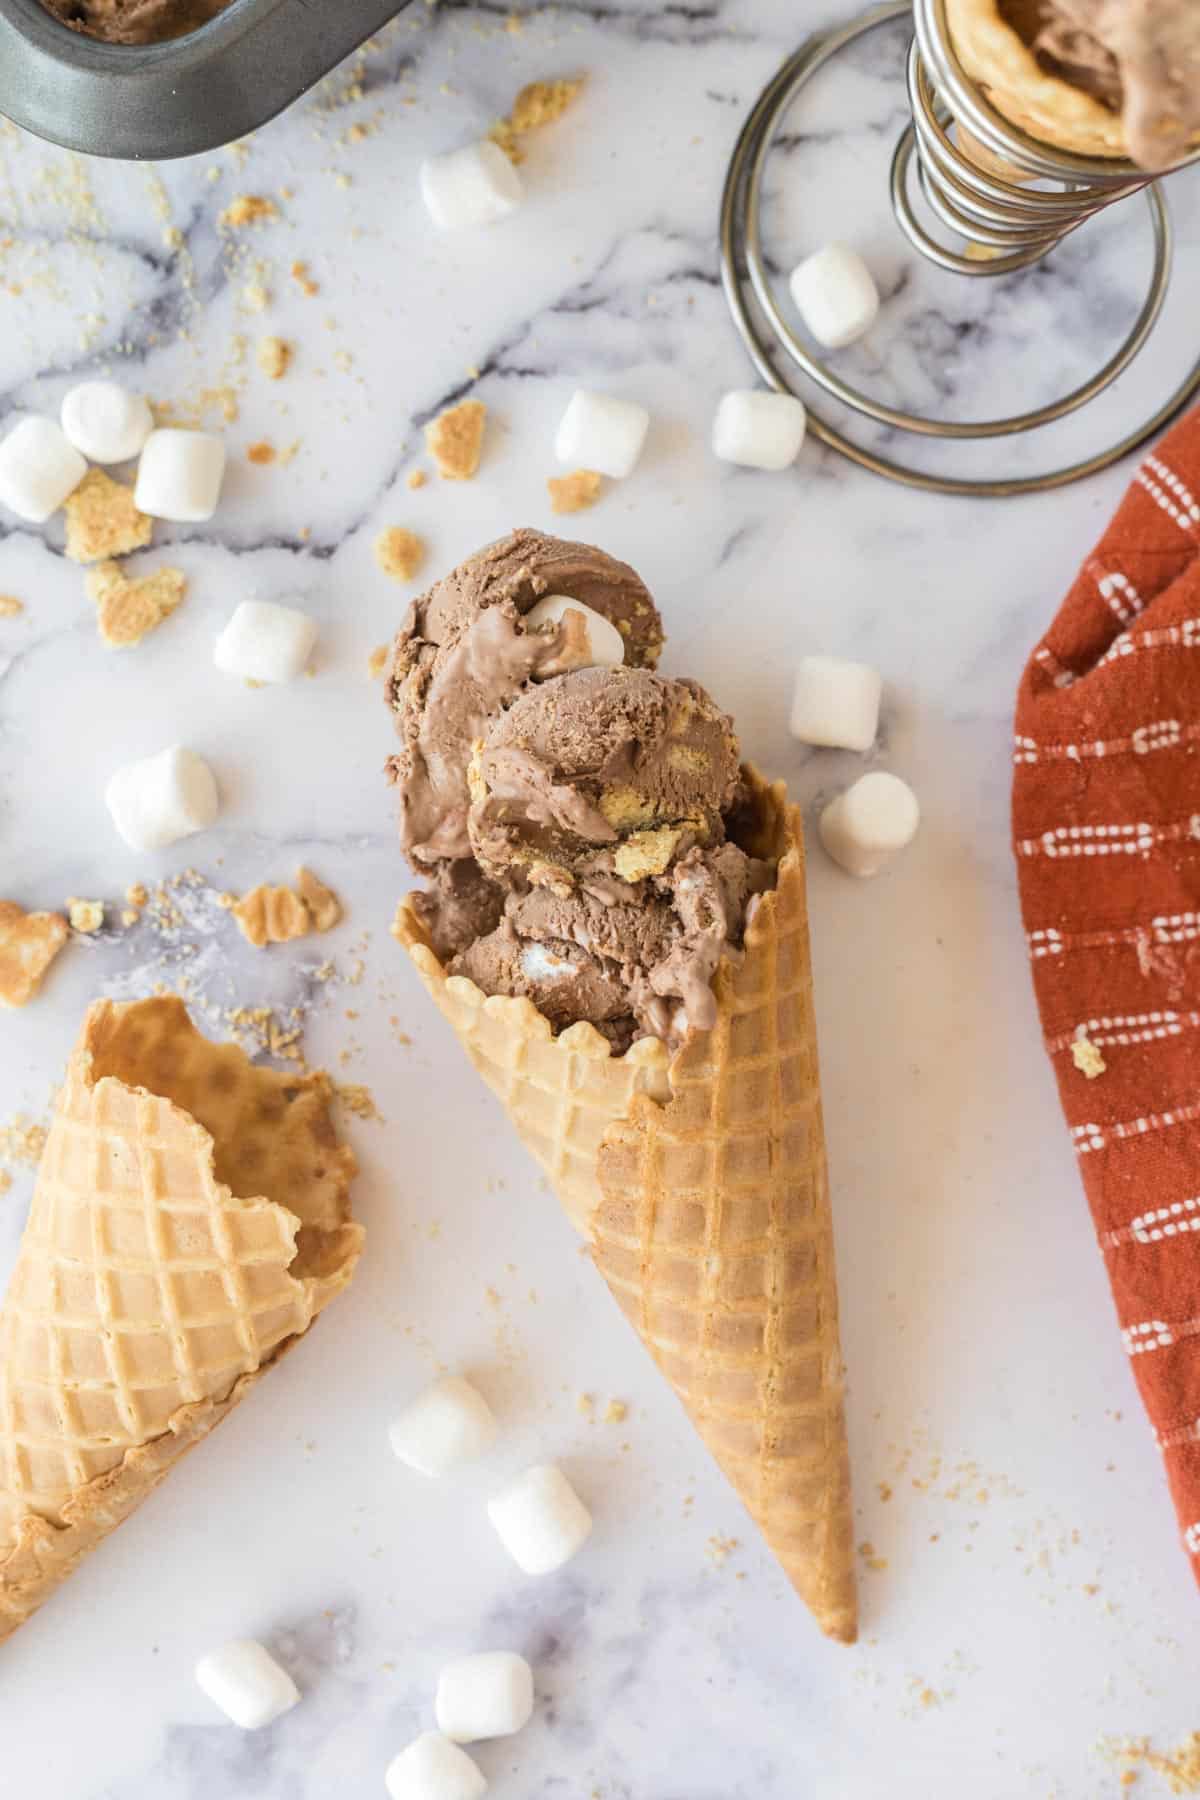 A waffle cone filled with chocolate s'mores ice cream on a marble table with scatter mini marshmallows and graham cracker crumbs on the table.